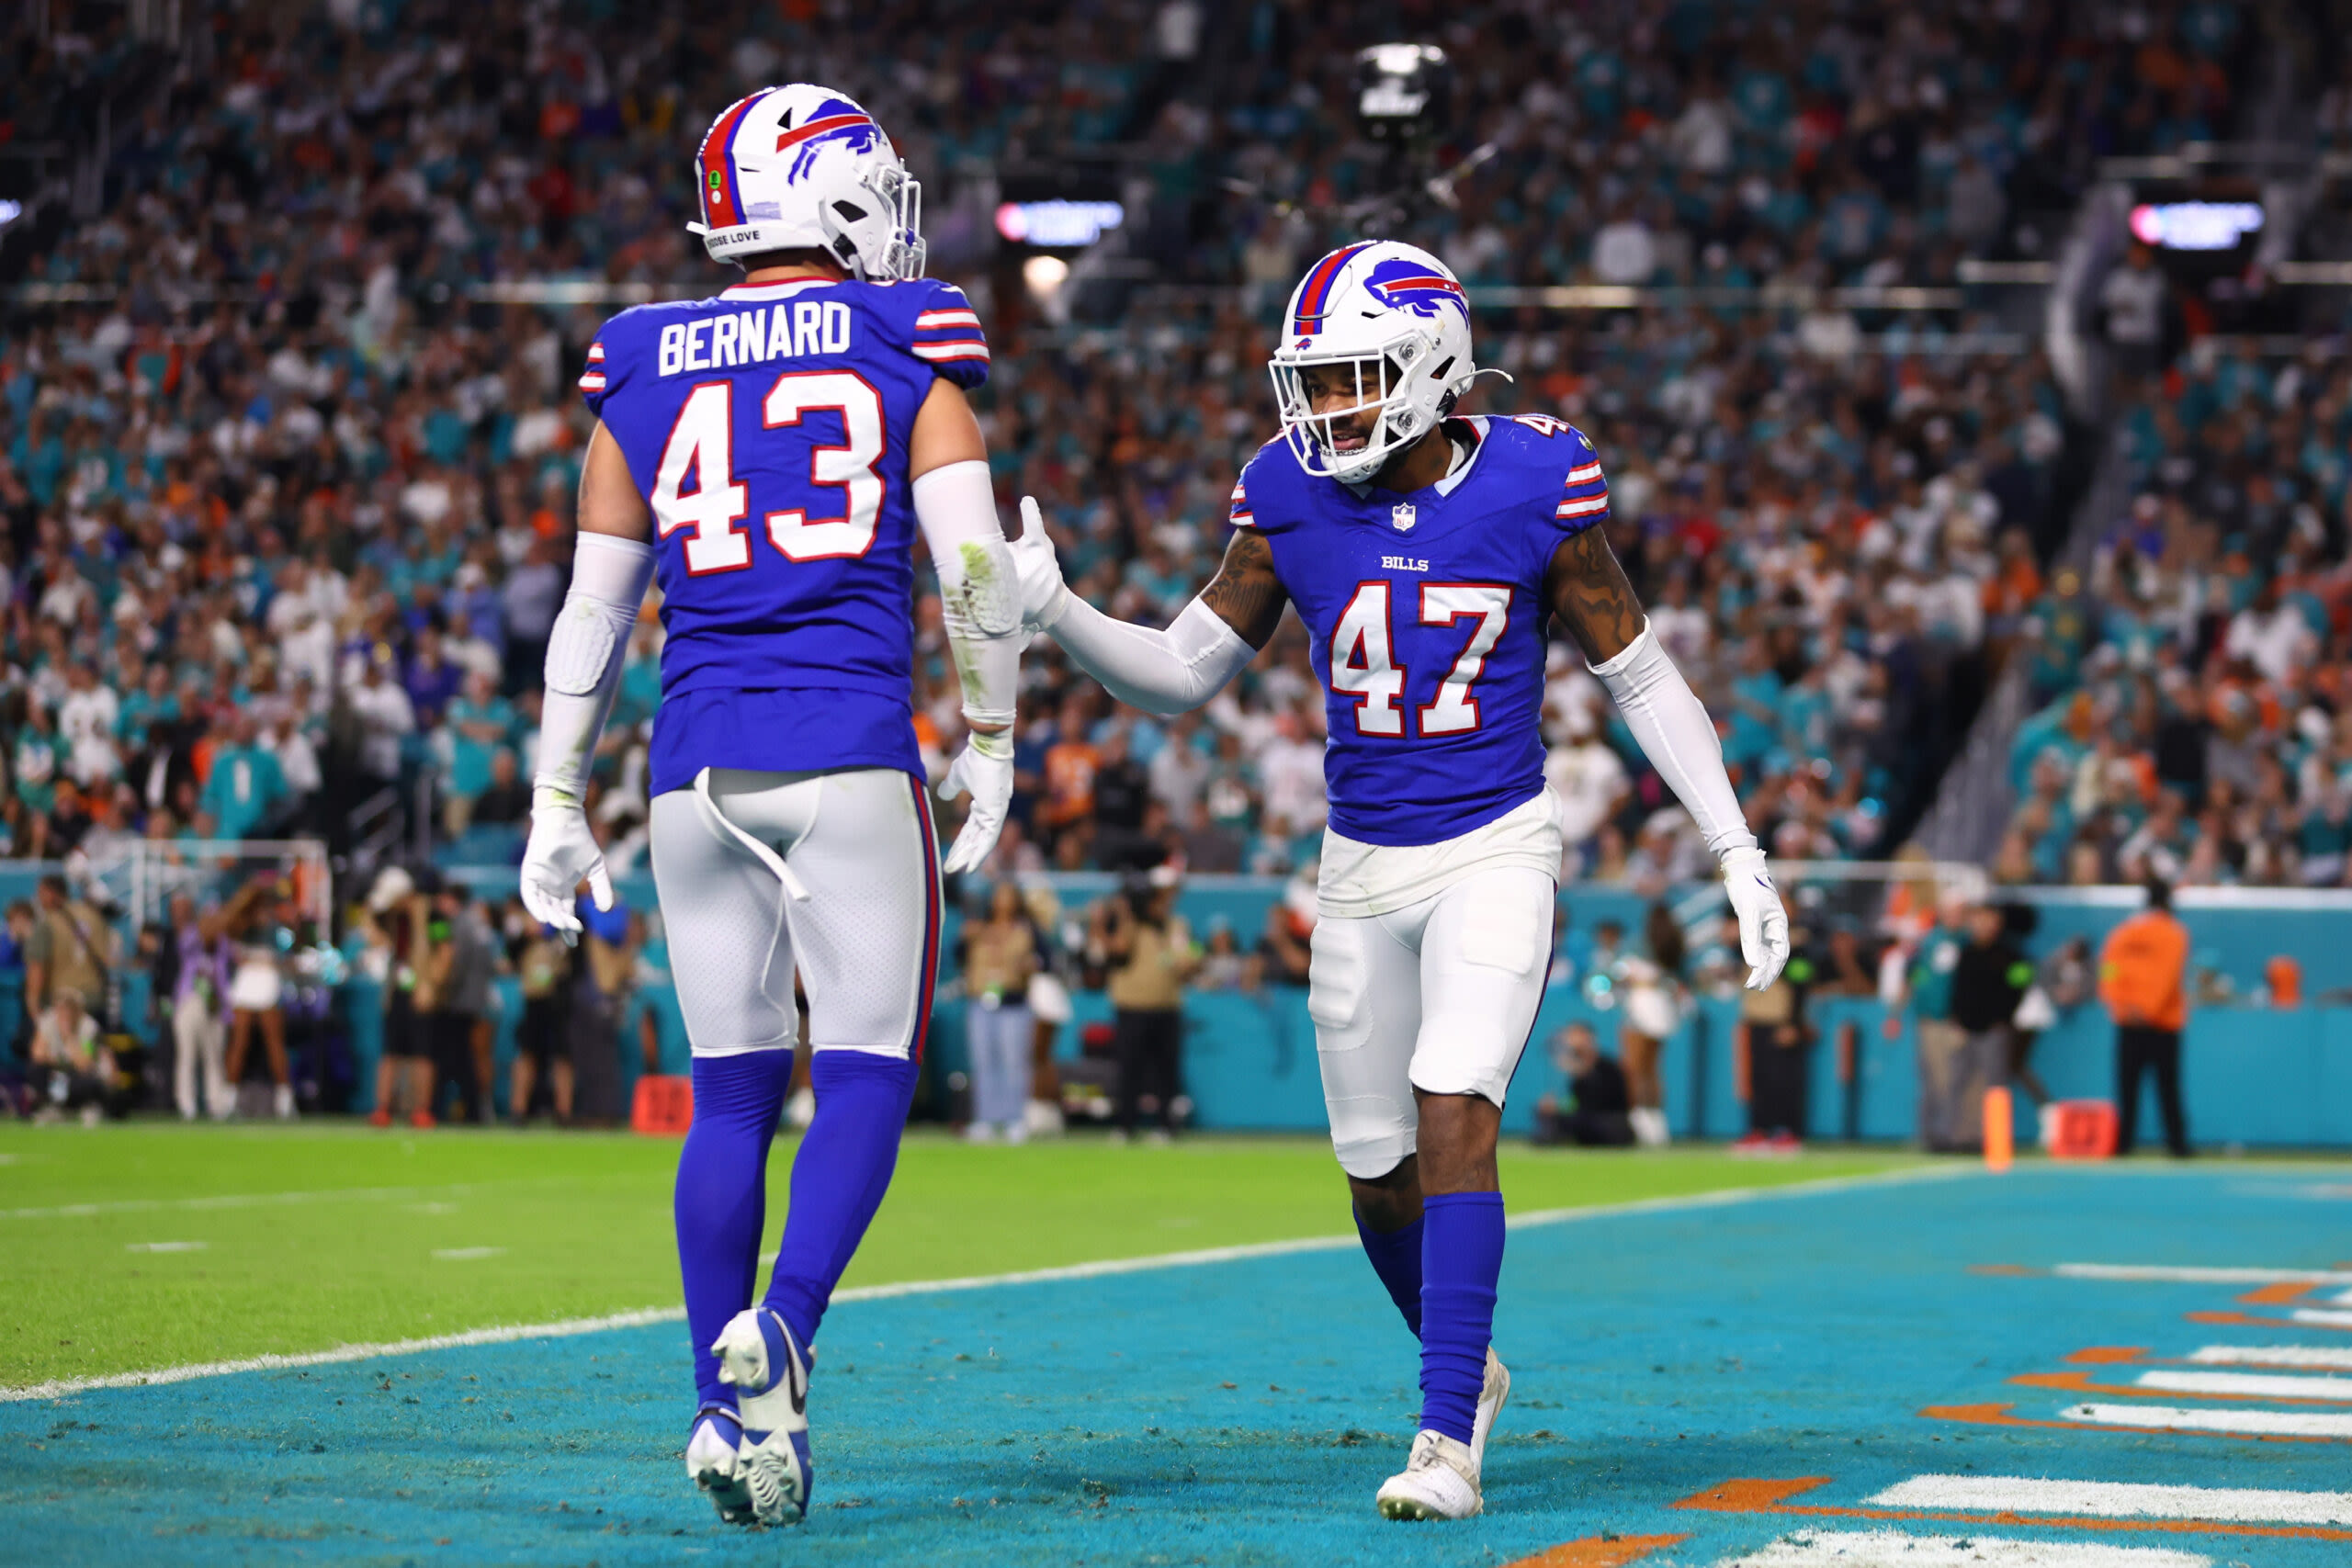 NFL.com: Christian Benford is Bills’ most underrated player